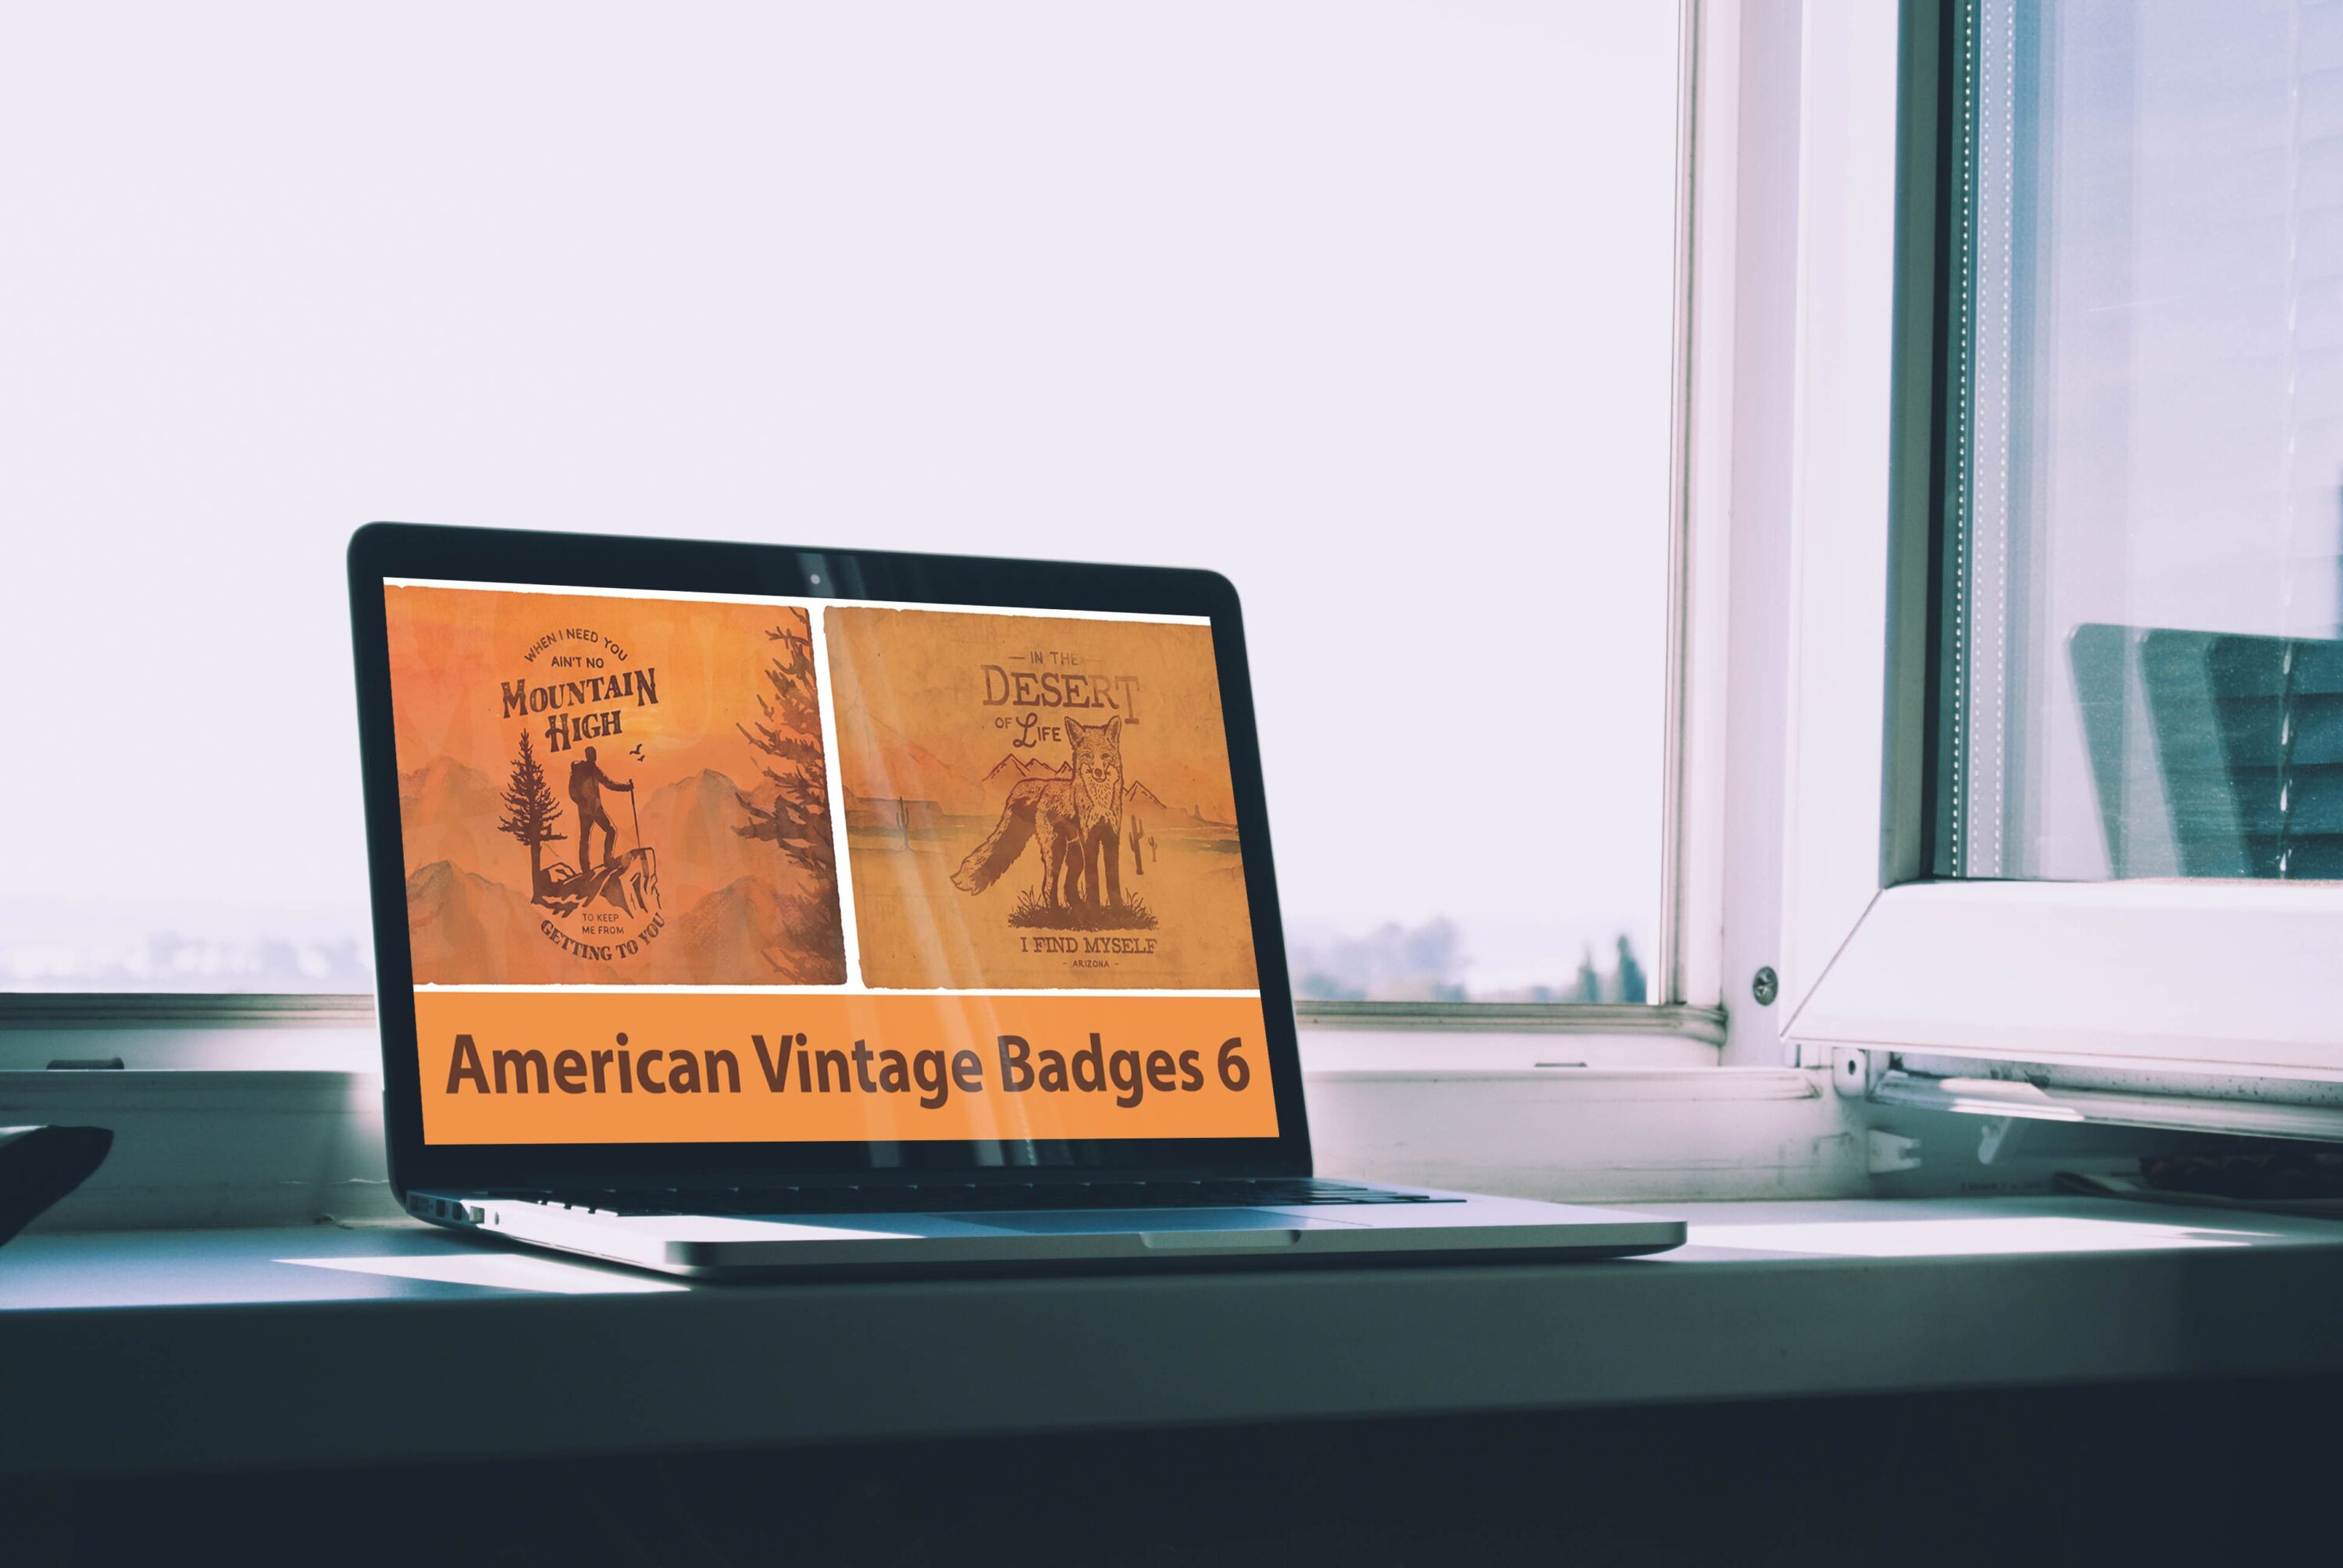 Laptop option of the American Vintage Badges 6.